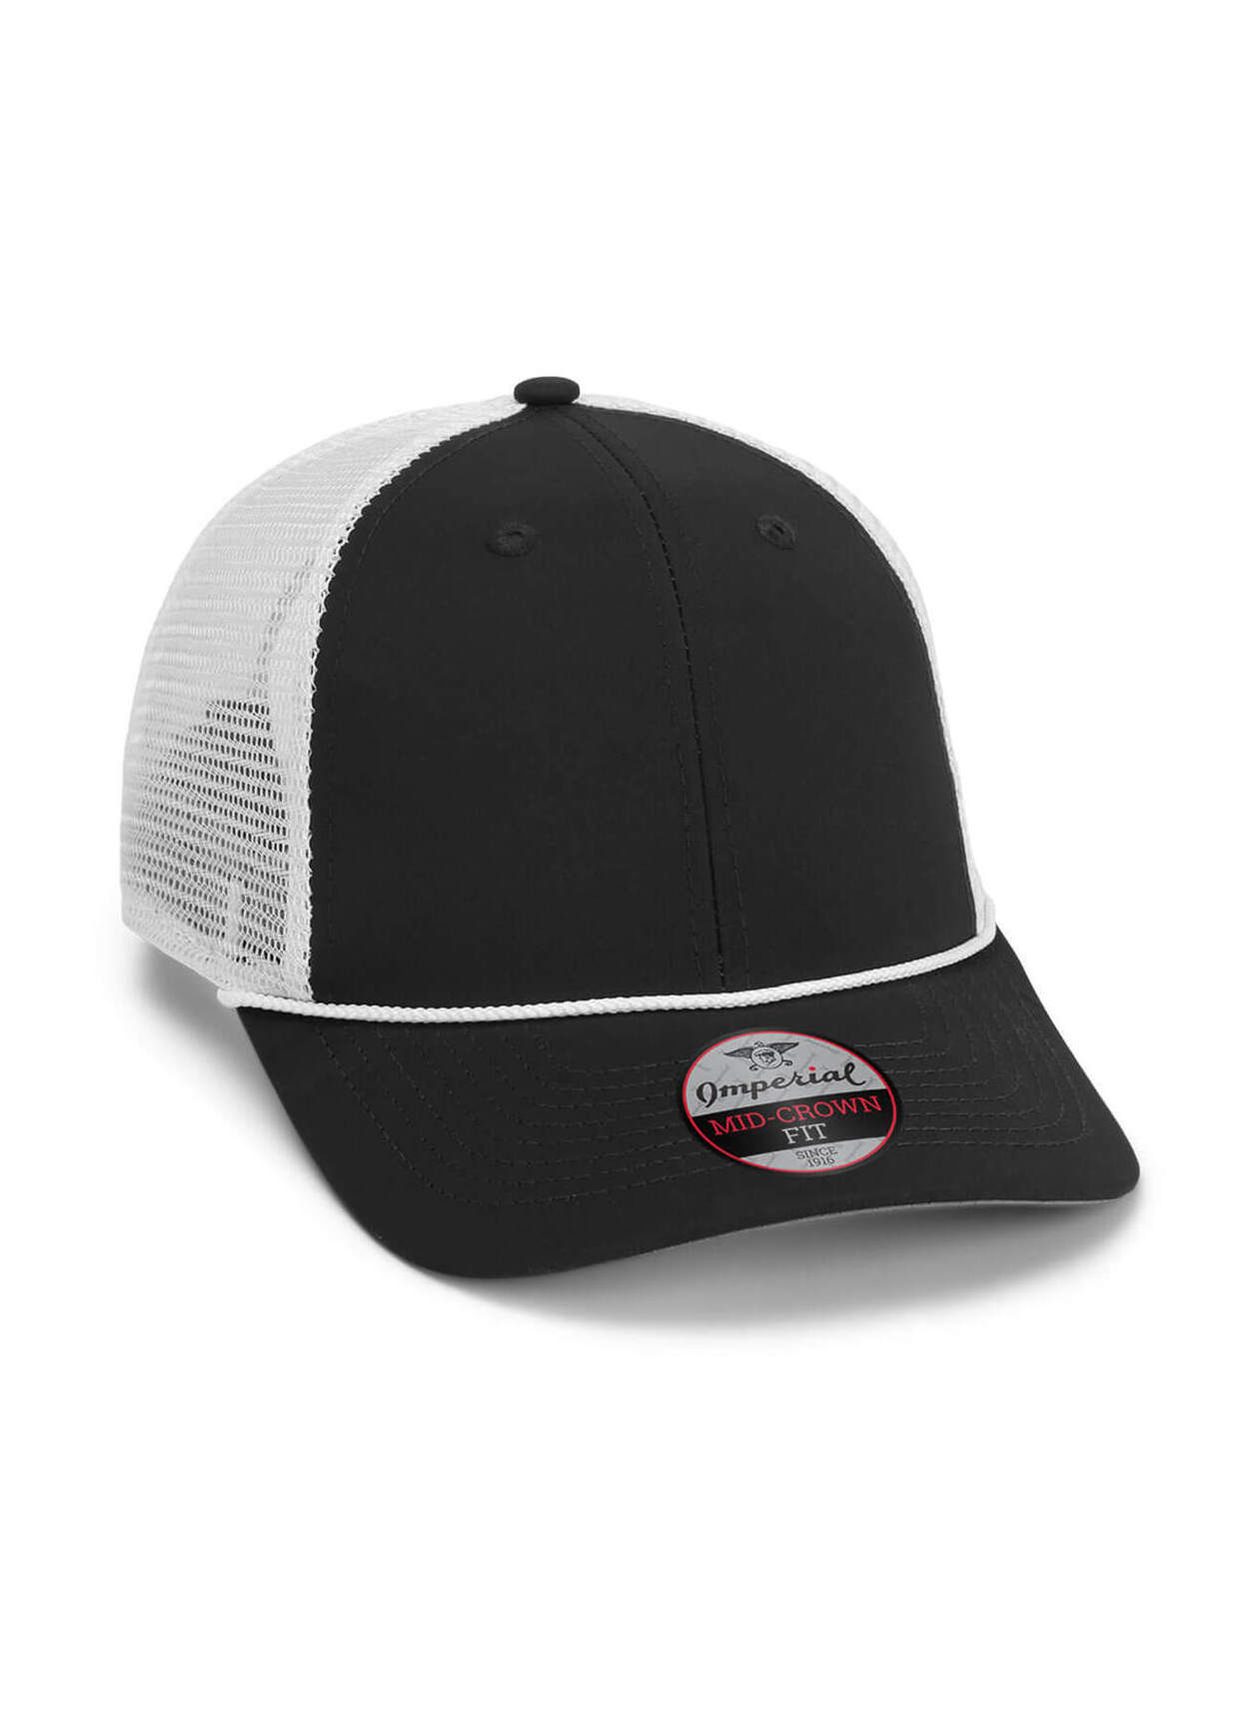 Imperial Black / White The Night Owl Mesh Back Performance Hat